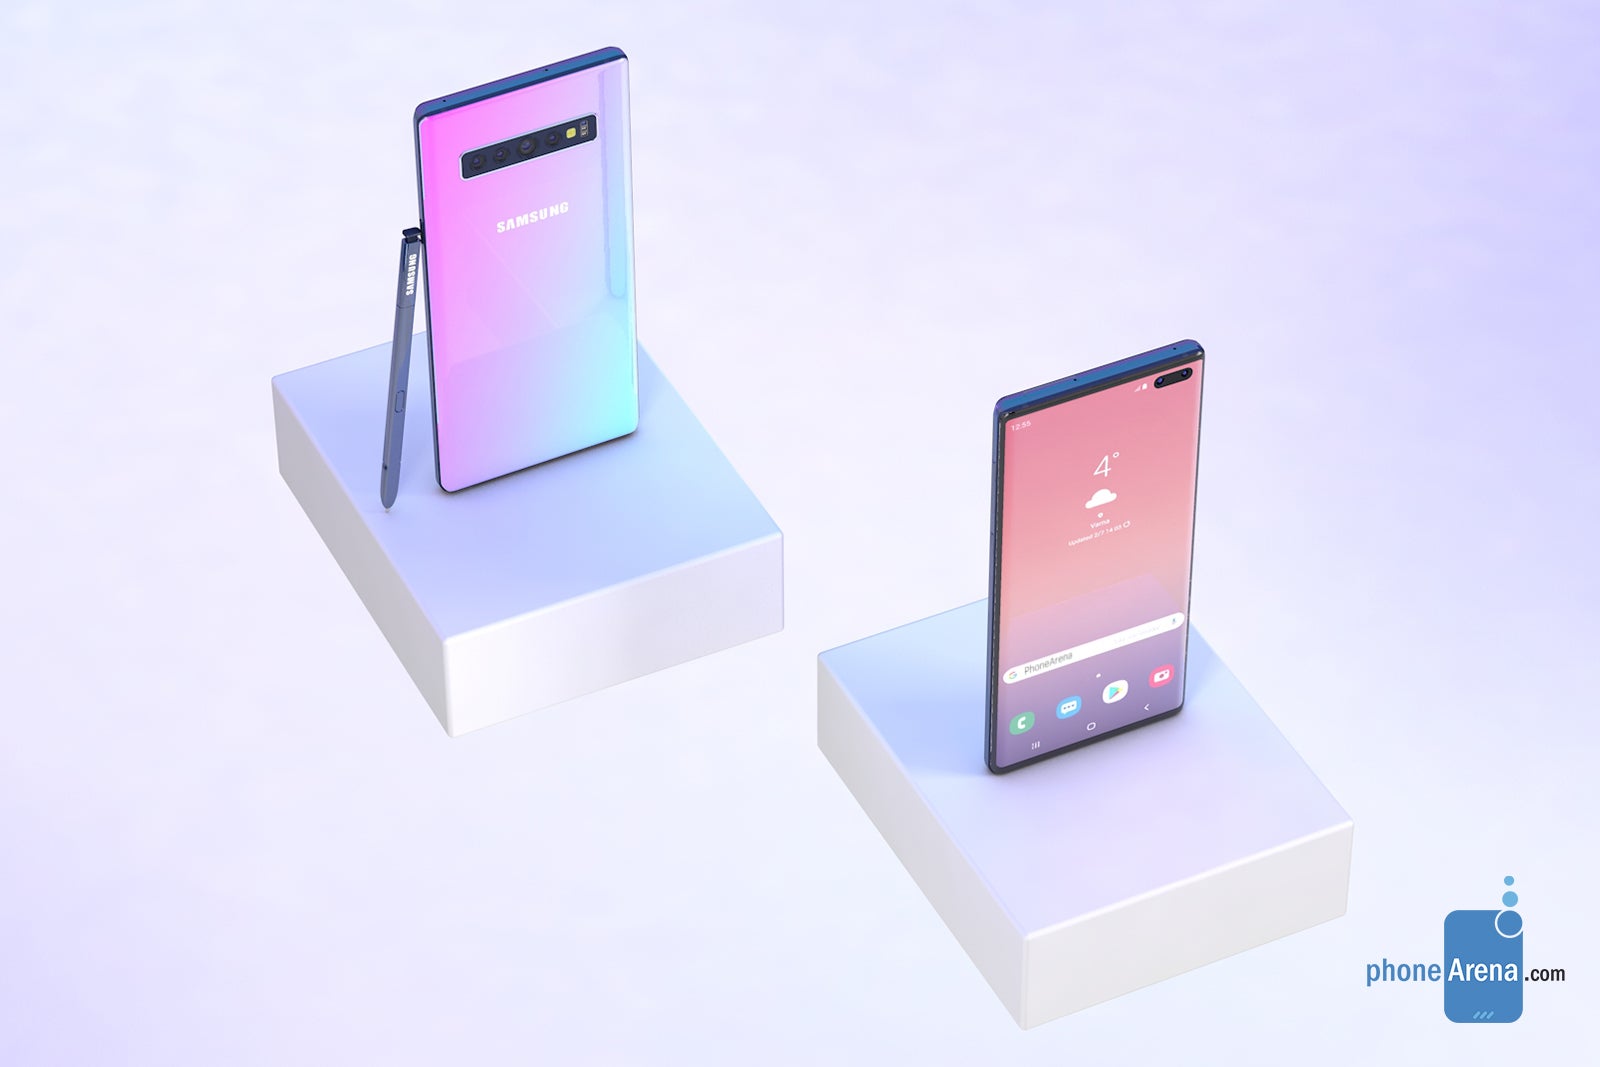 Samsung Galaxy Note 10 concept render - The Galaxy Note 10 could be sold in these six colors